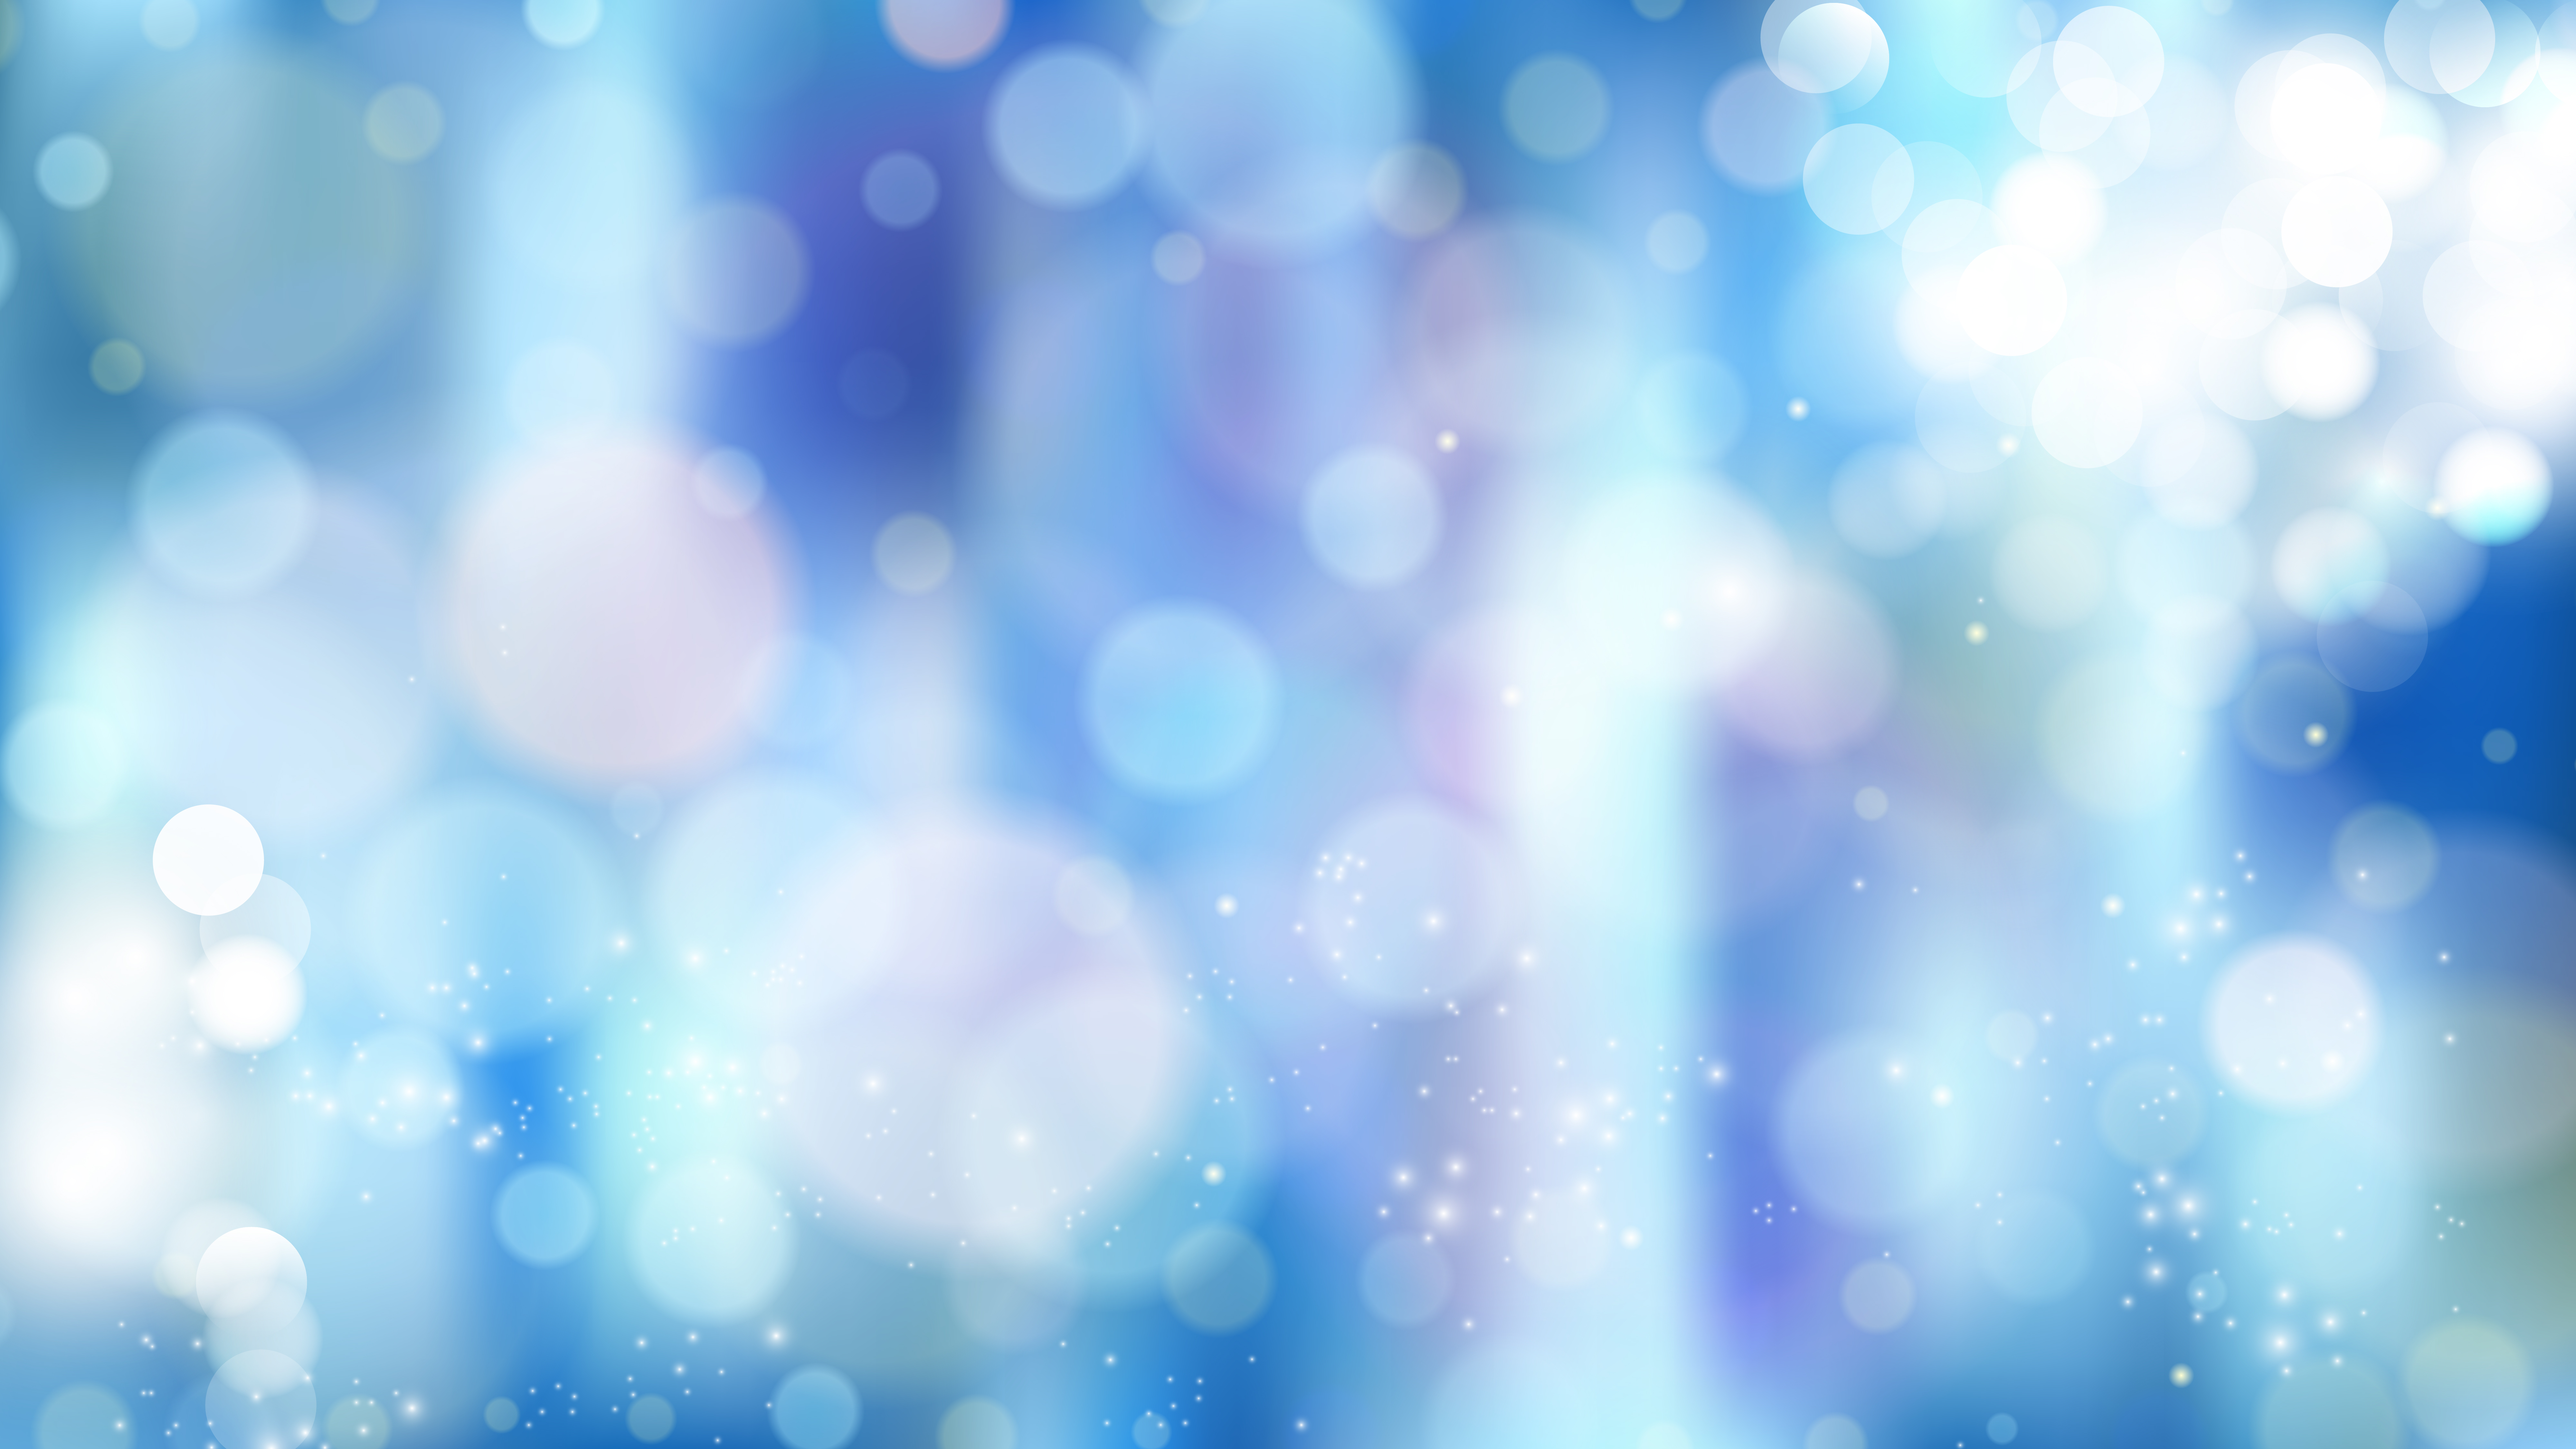 Abstract Light Color Blurred Bokeh Background